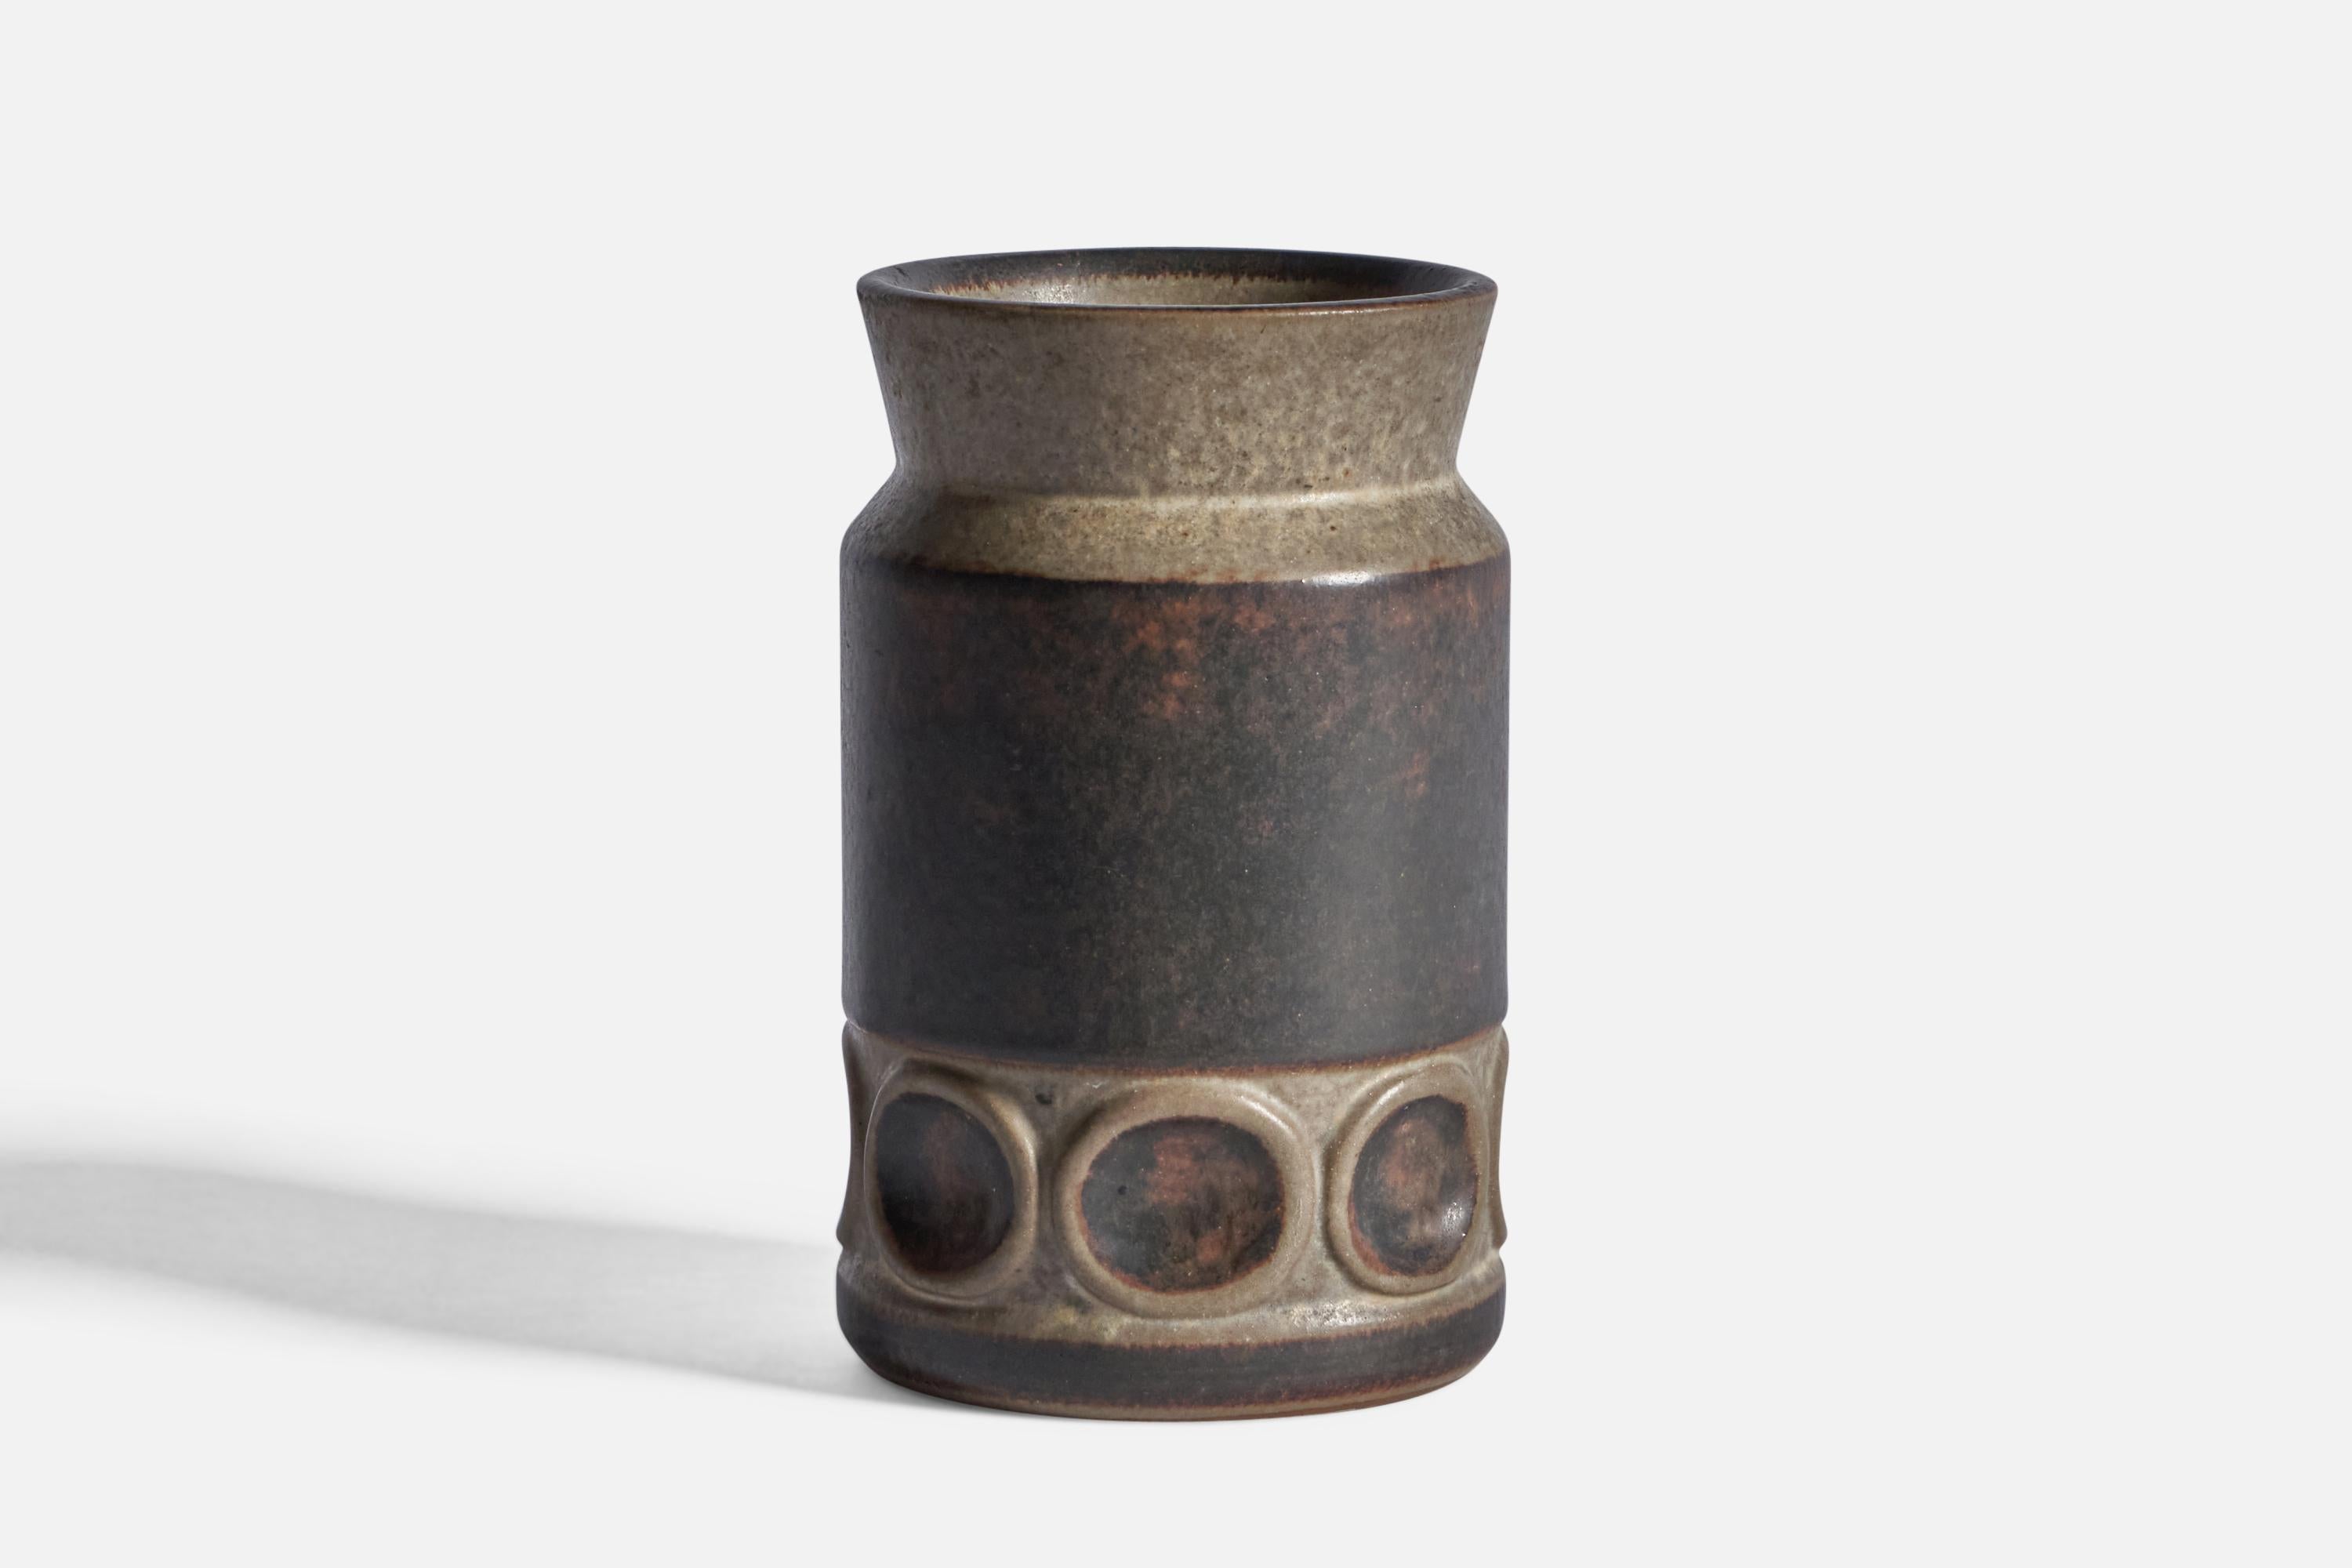 A grey and brown-glazed stoneware vase designed by Marianne Starck and produced by Michael Andersen, Bornholm, Denmark, 1960s.